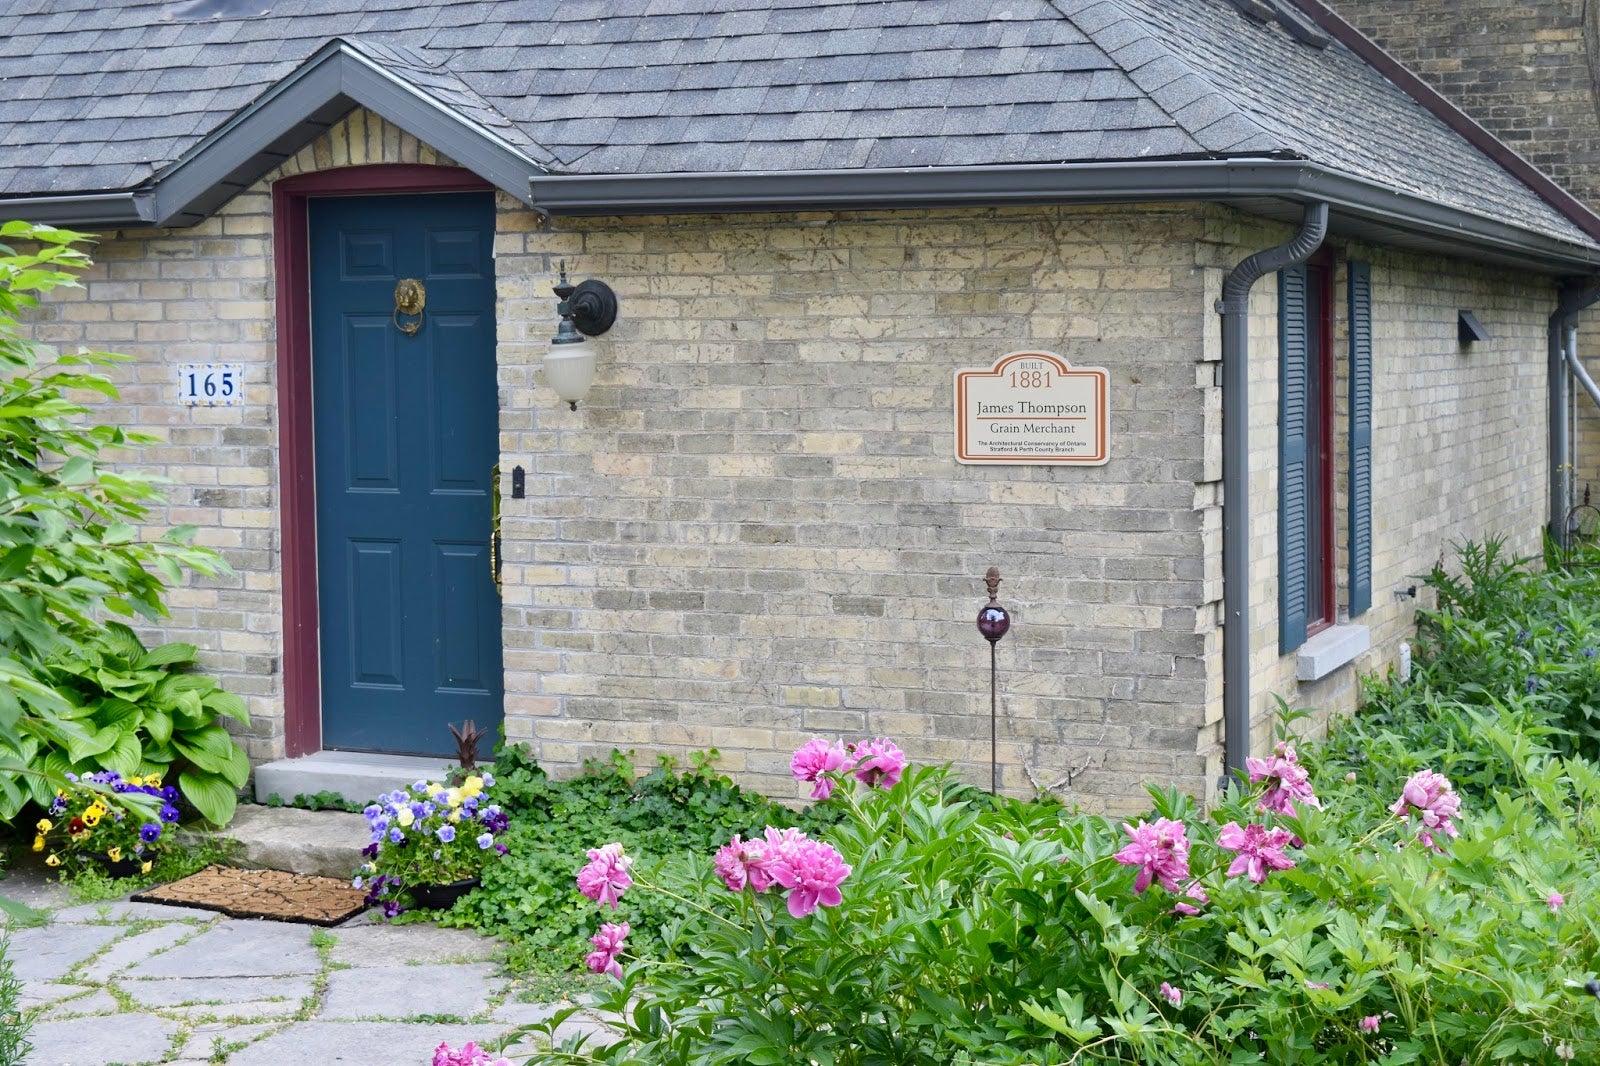 The corner of a stone home with a plaque on the wall and garden beside, clear to read by pedestrians